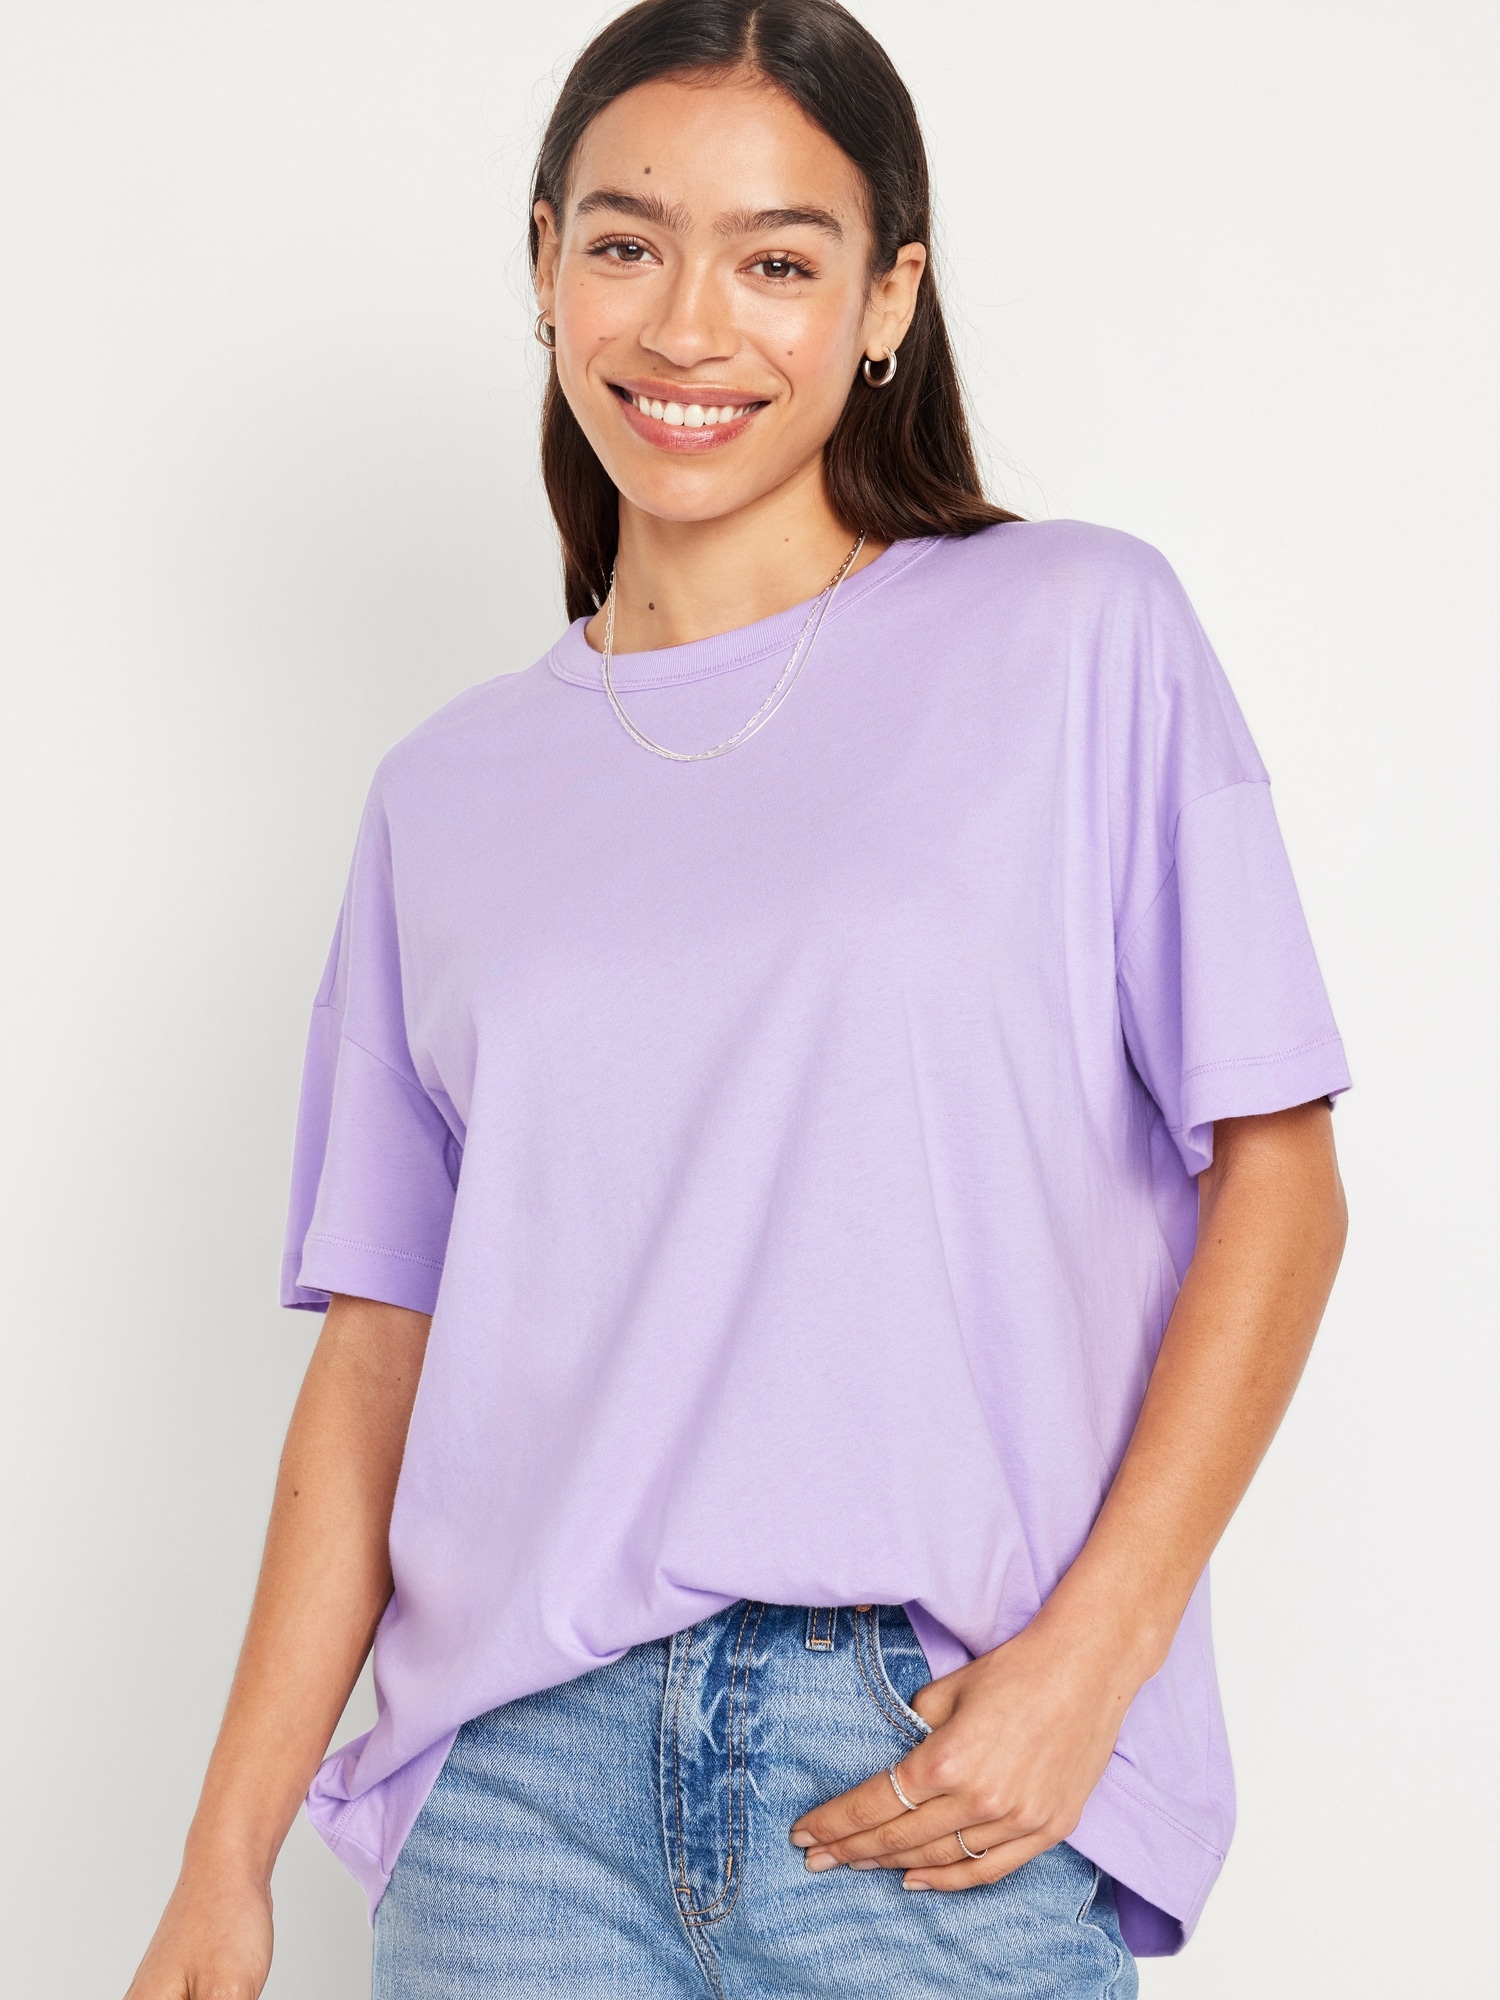 Oversized T Shirts for Women Tunic Tops to Wear with Leggings Long